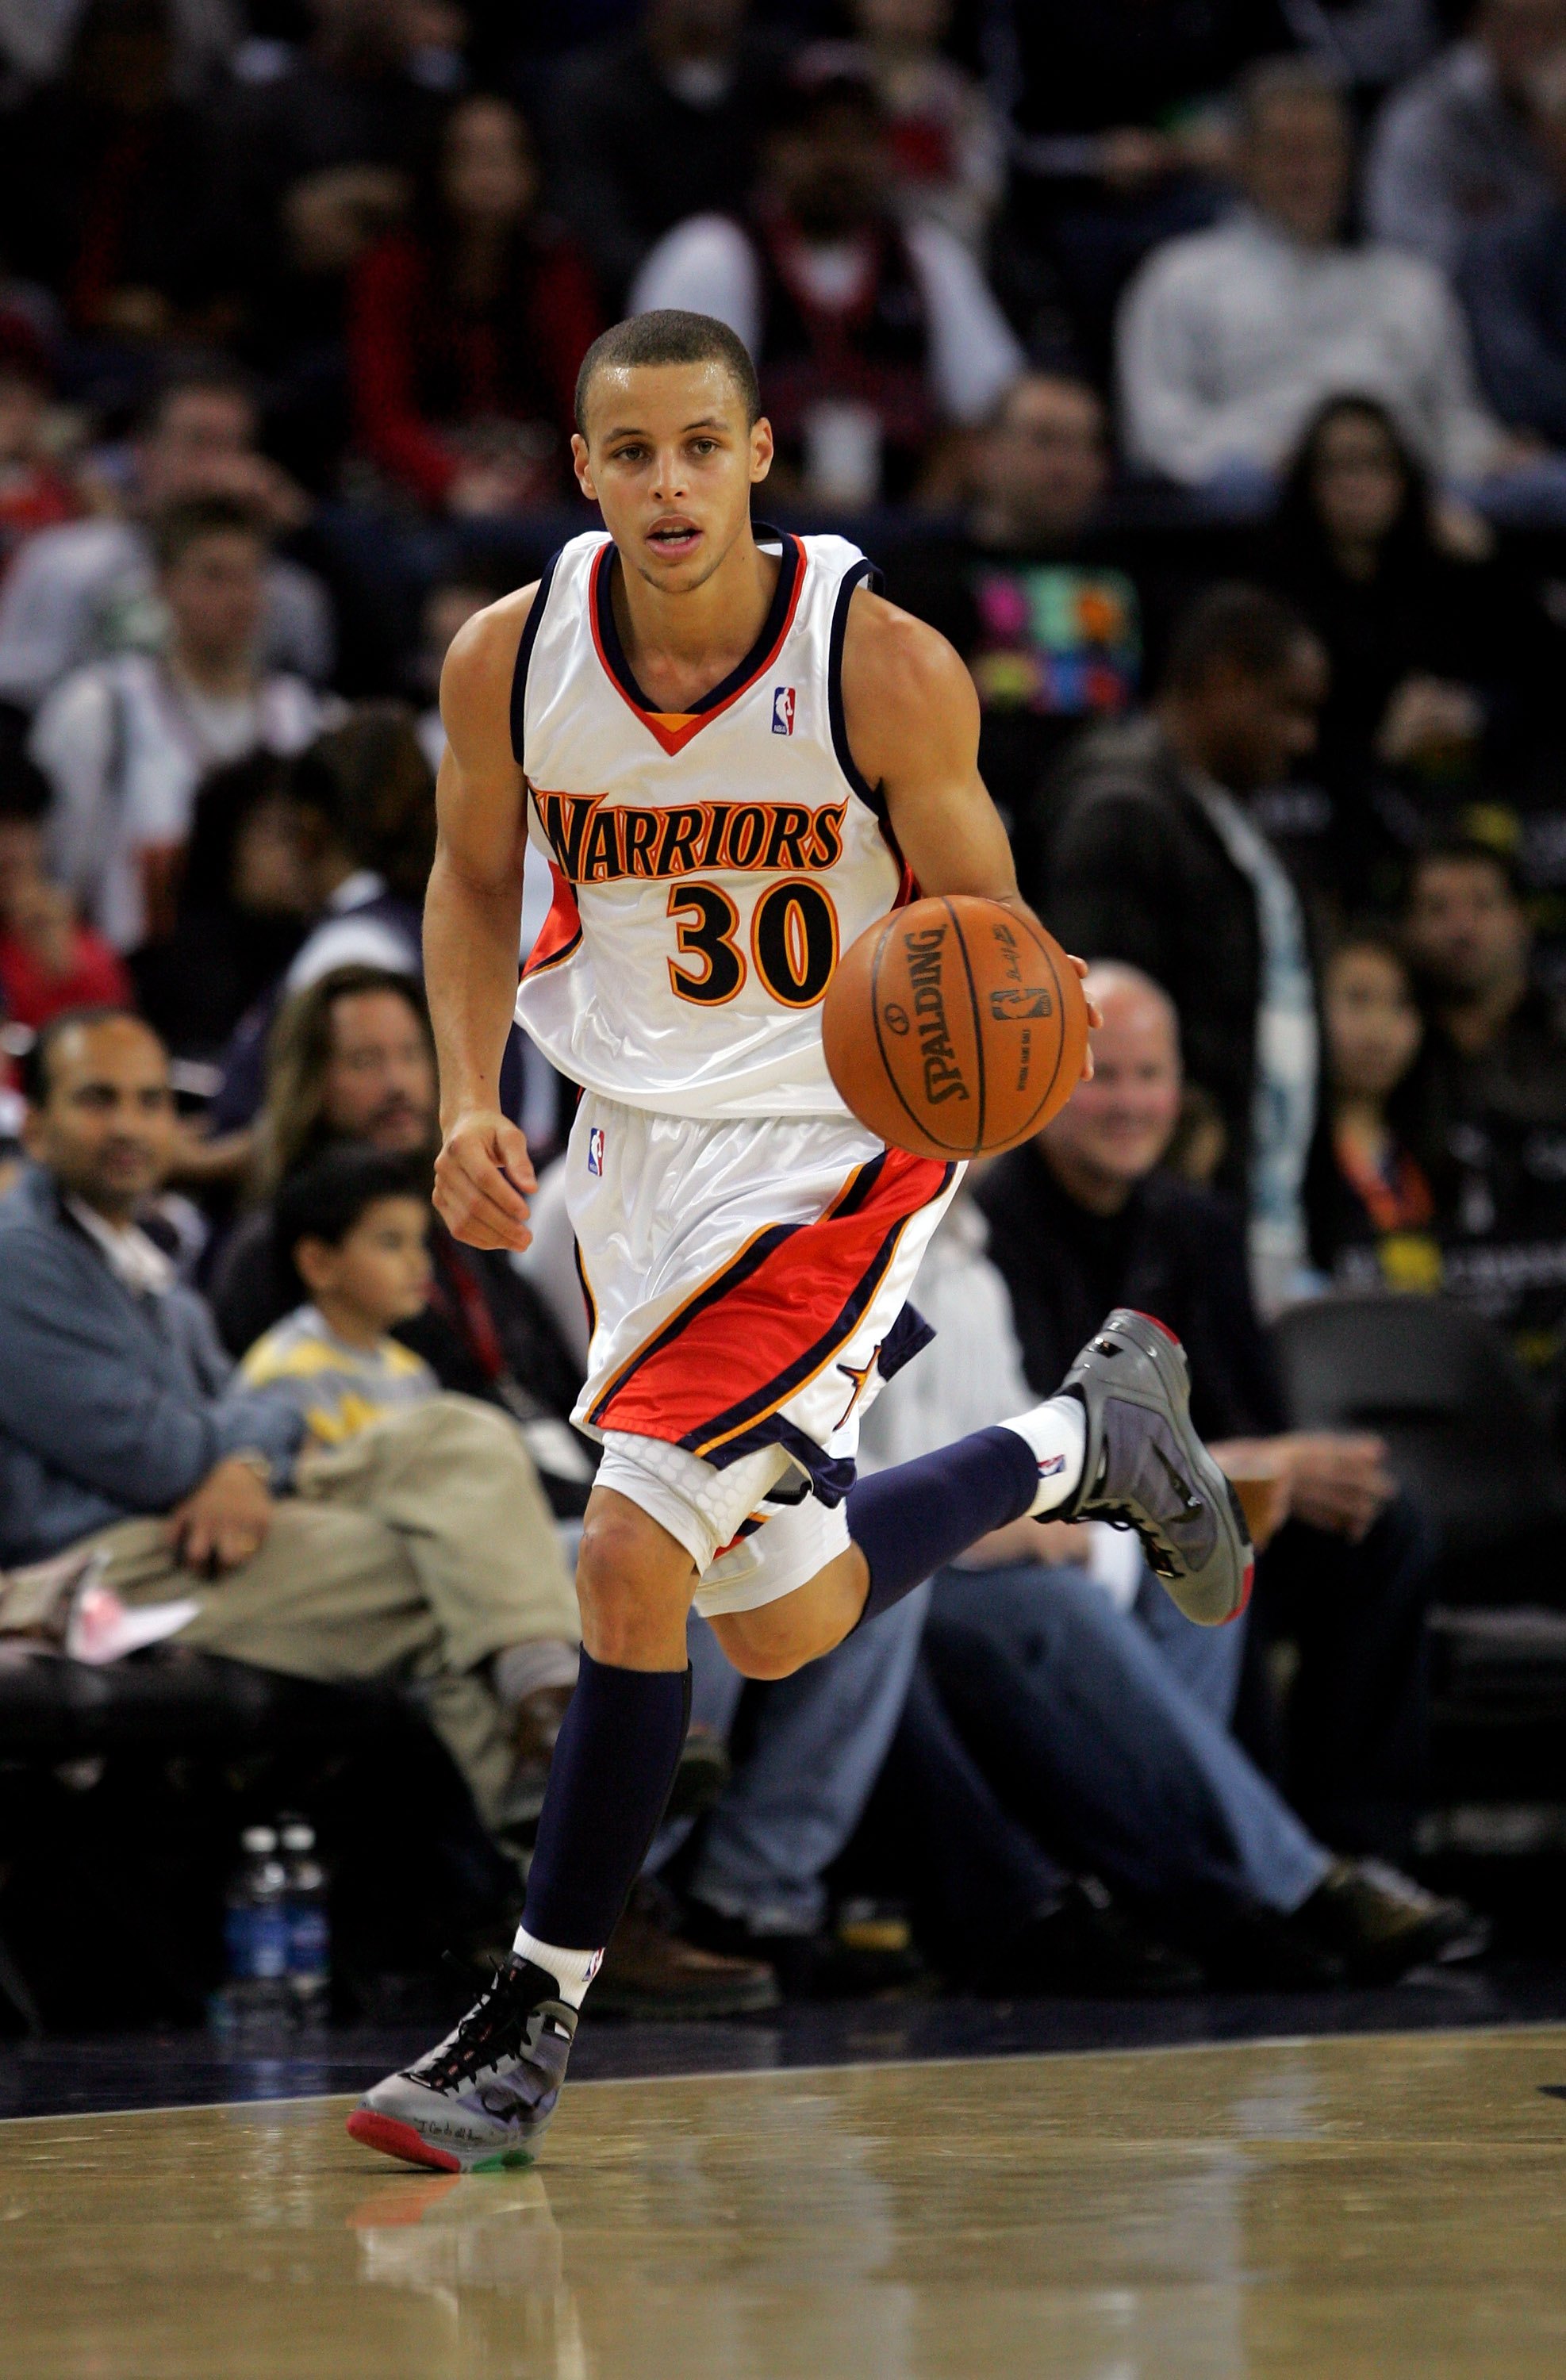 OAKLAND, CA - JANUARY 18:  Stephen Curry #30 of the Golden State Warriors in action during their game against the Chicago Bulls at Oracle Arena on January 18, 2010 in Oakland, California.  NOTE TO USER: User expressly acknowledges and agrees that, by down